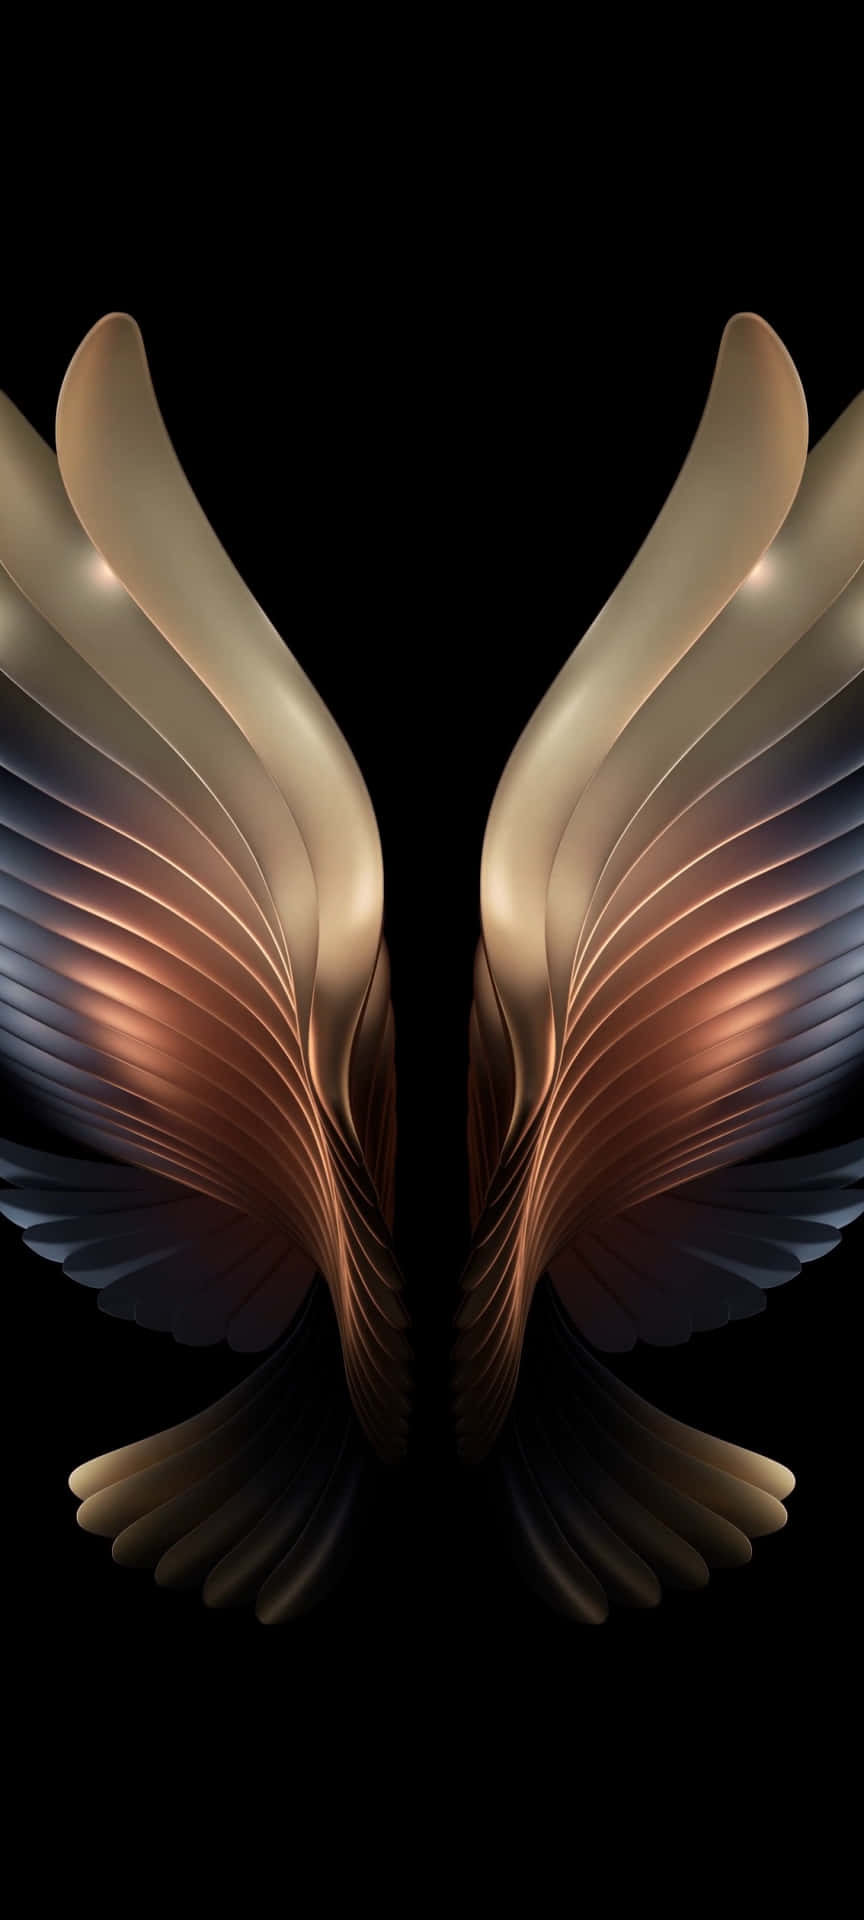 Two Golden And Brown Wings On A Black Background Wallpaper